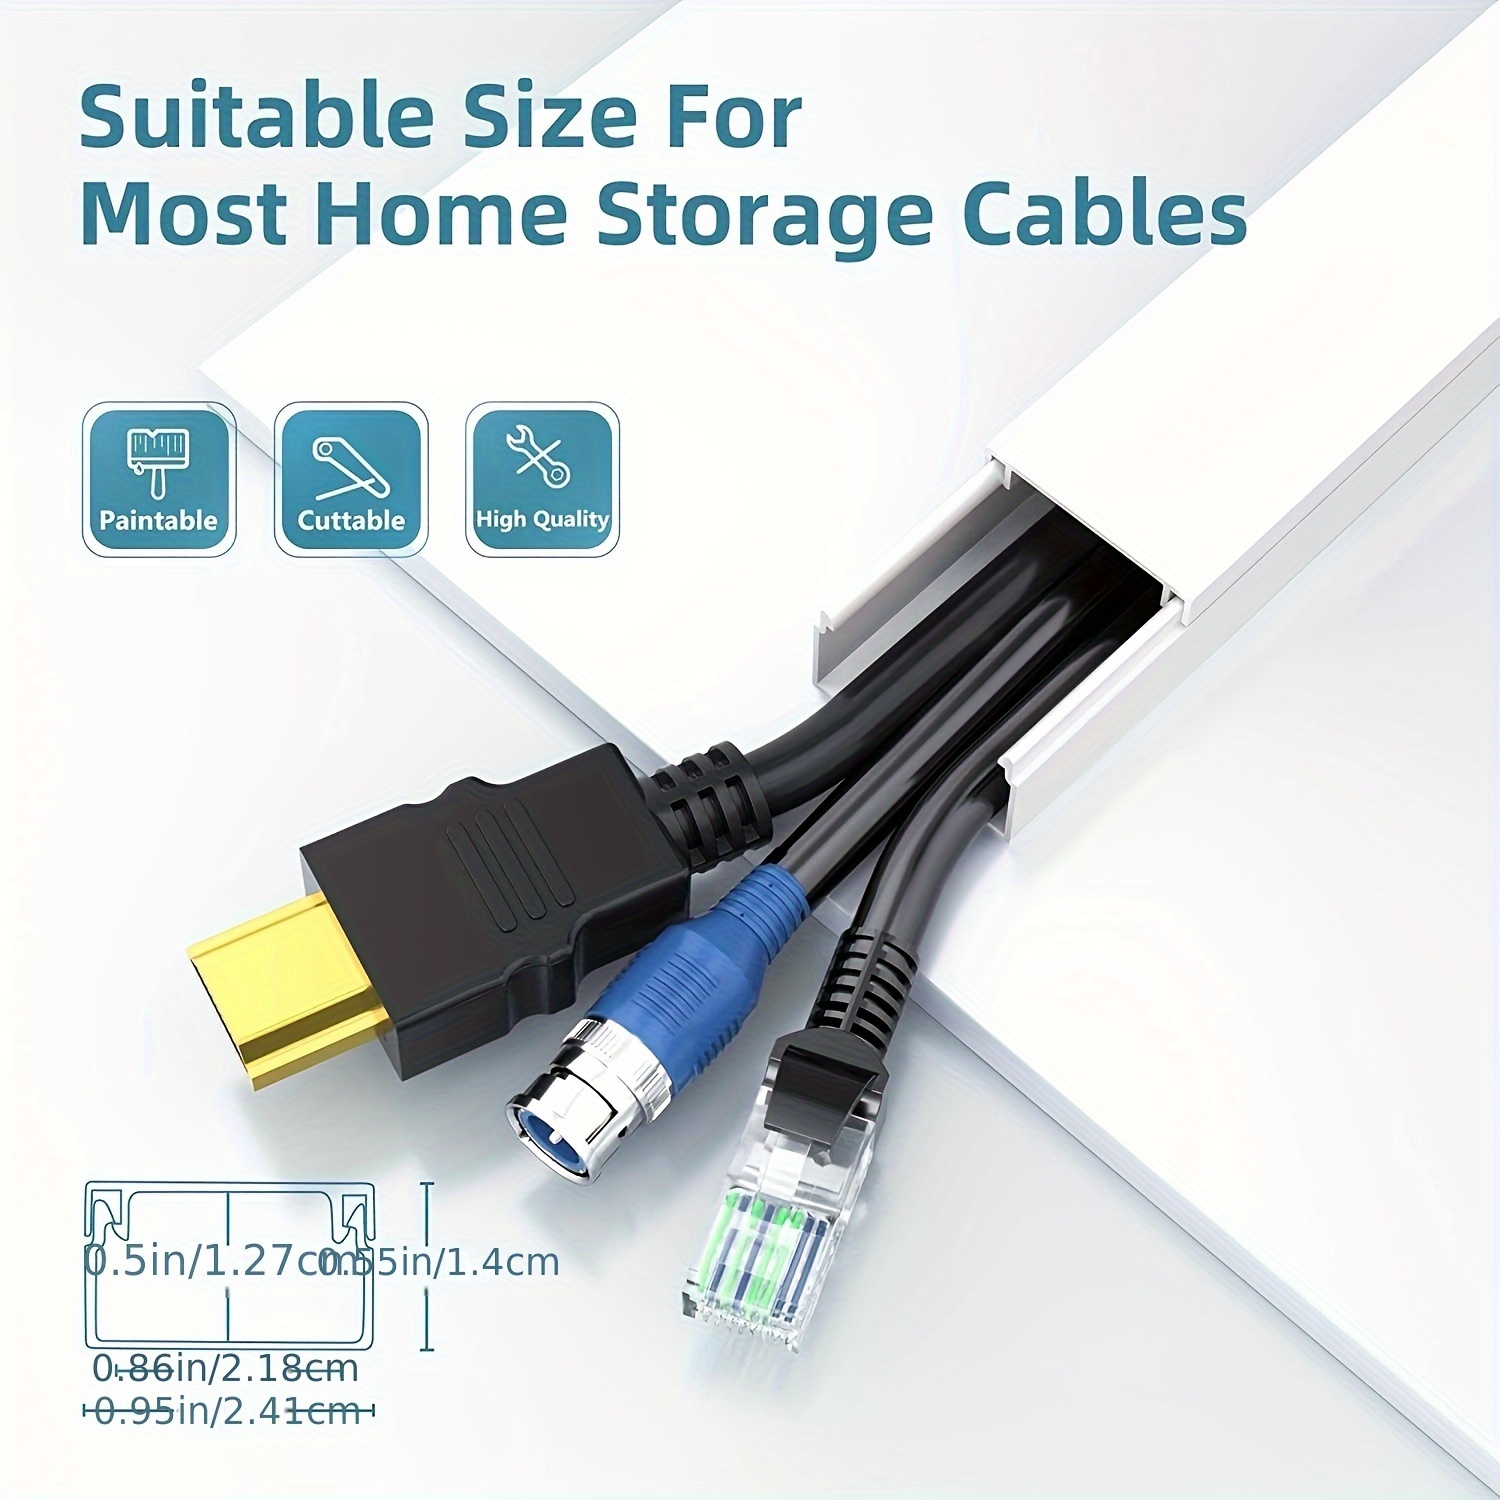 One-cord Channel Cable Concealer Cmc-03 Cord Cover Wall Cable Management  System 125 Inch Cable Hide